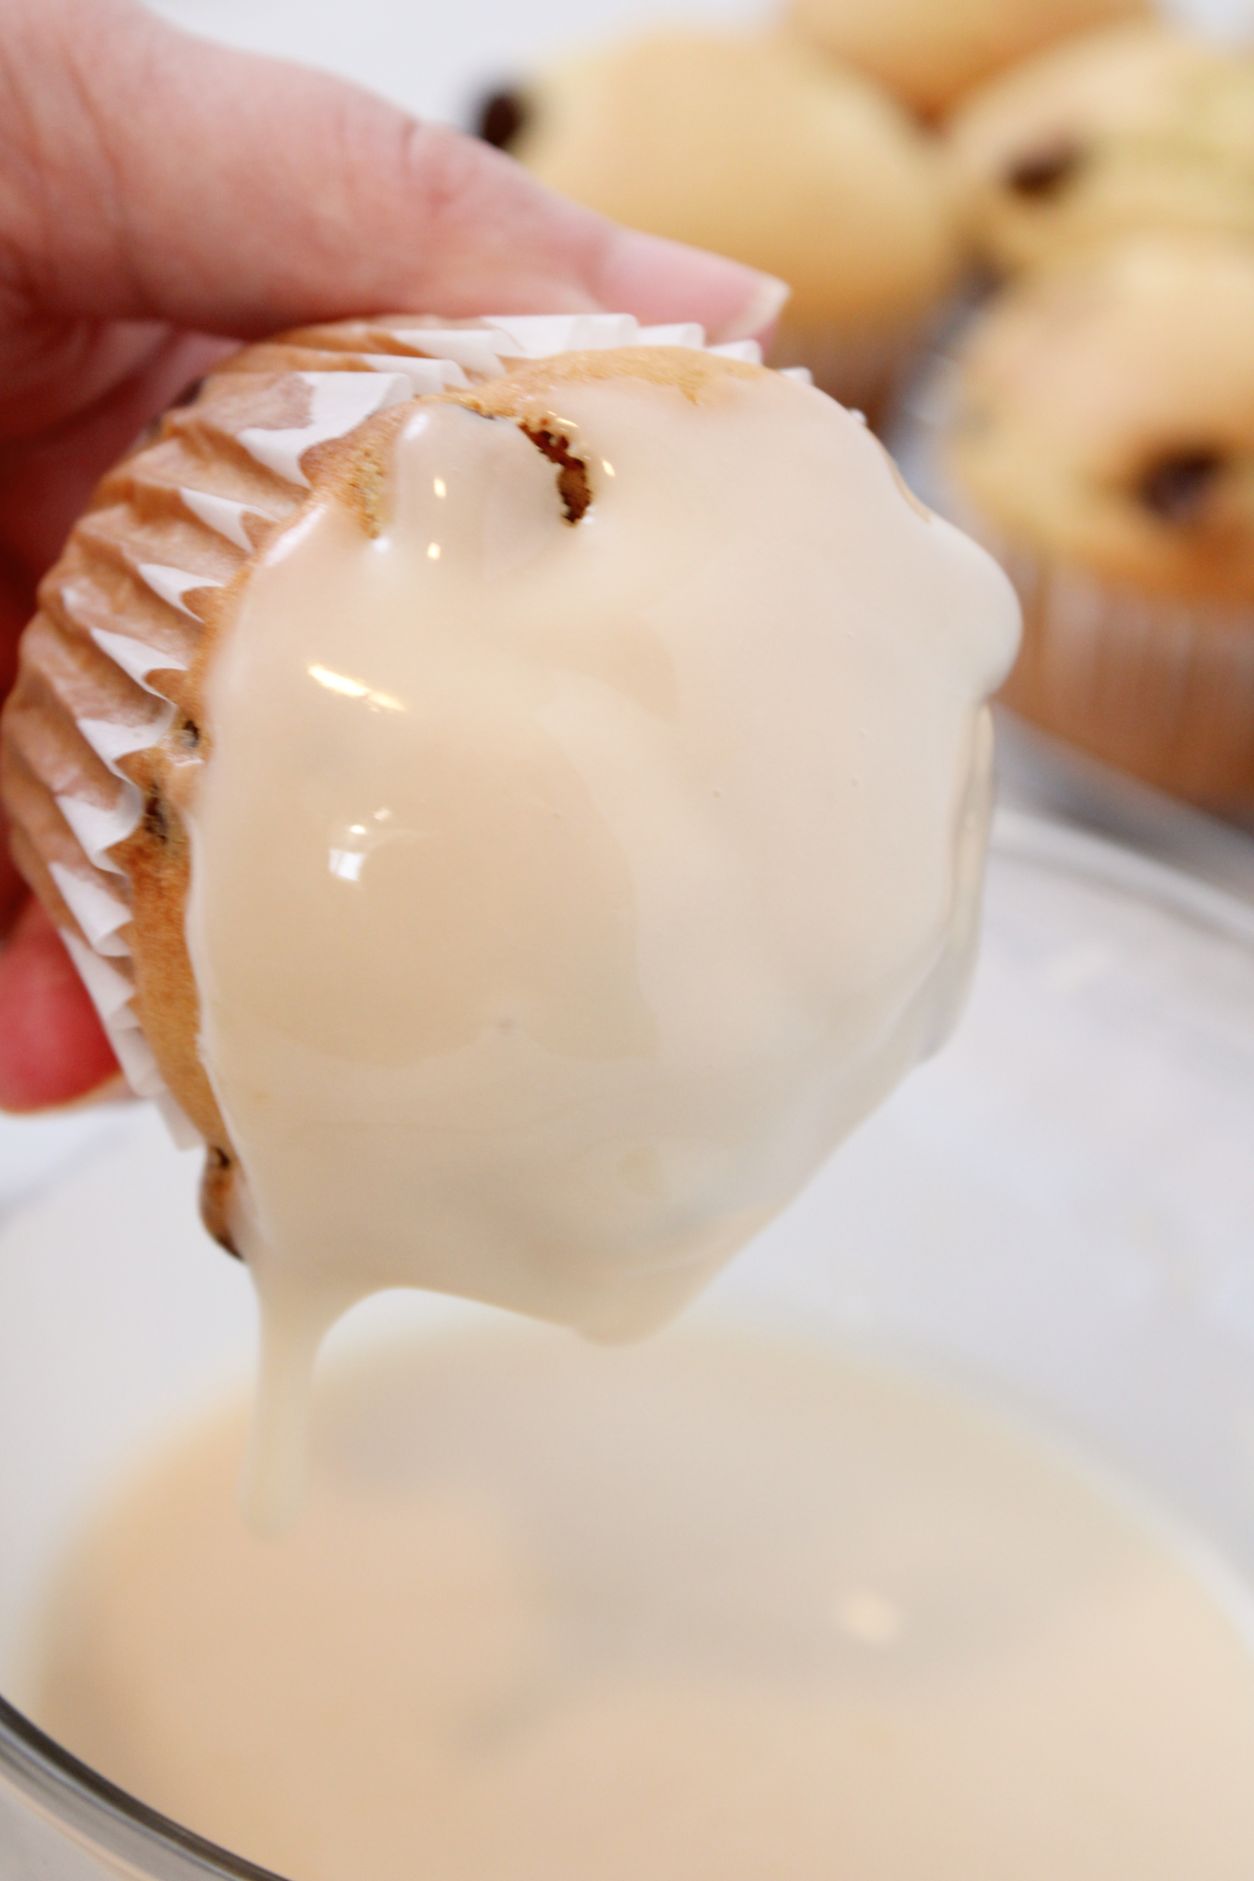 Muffins being dipped in an light orange glaze